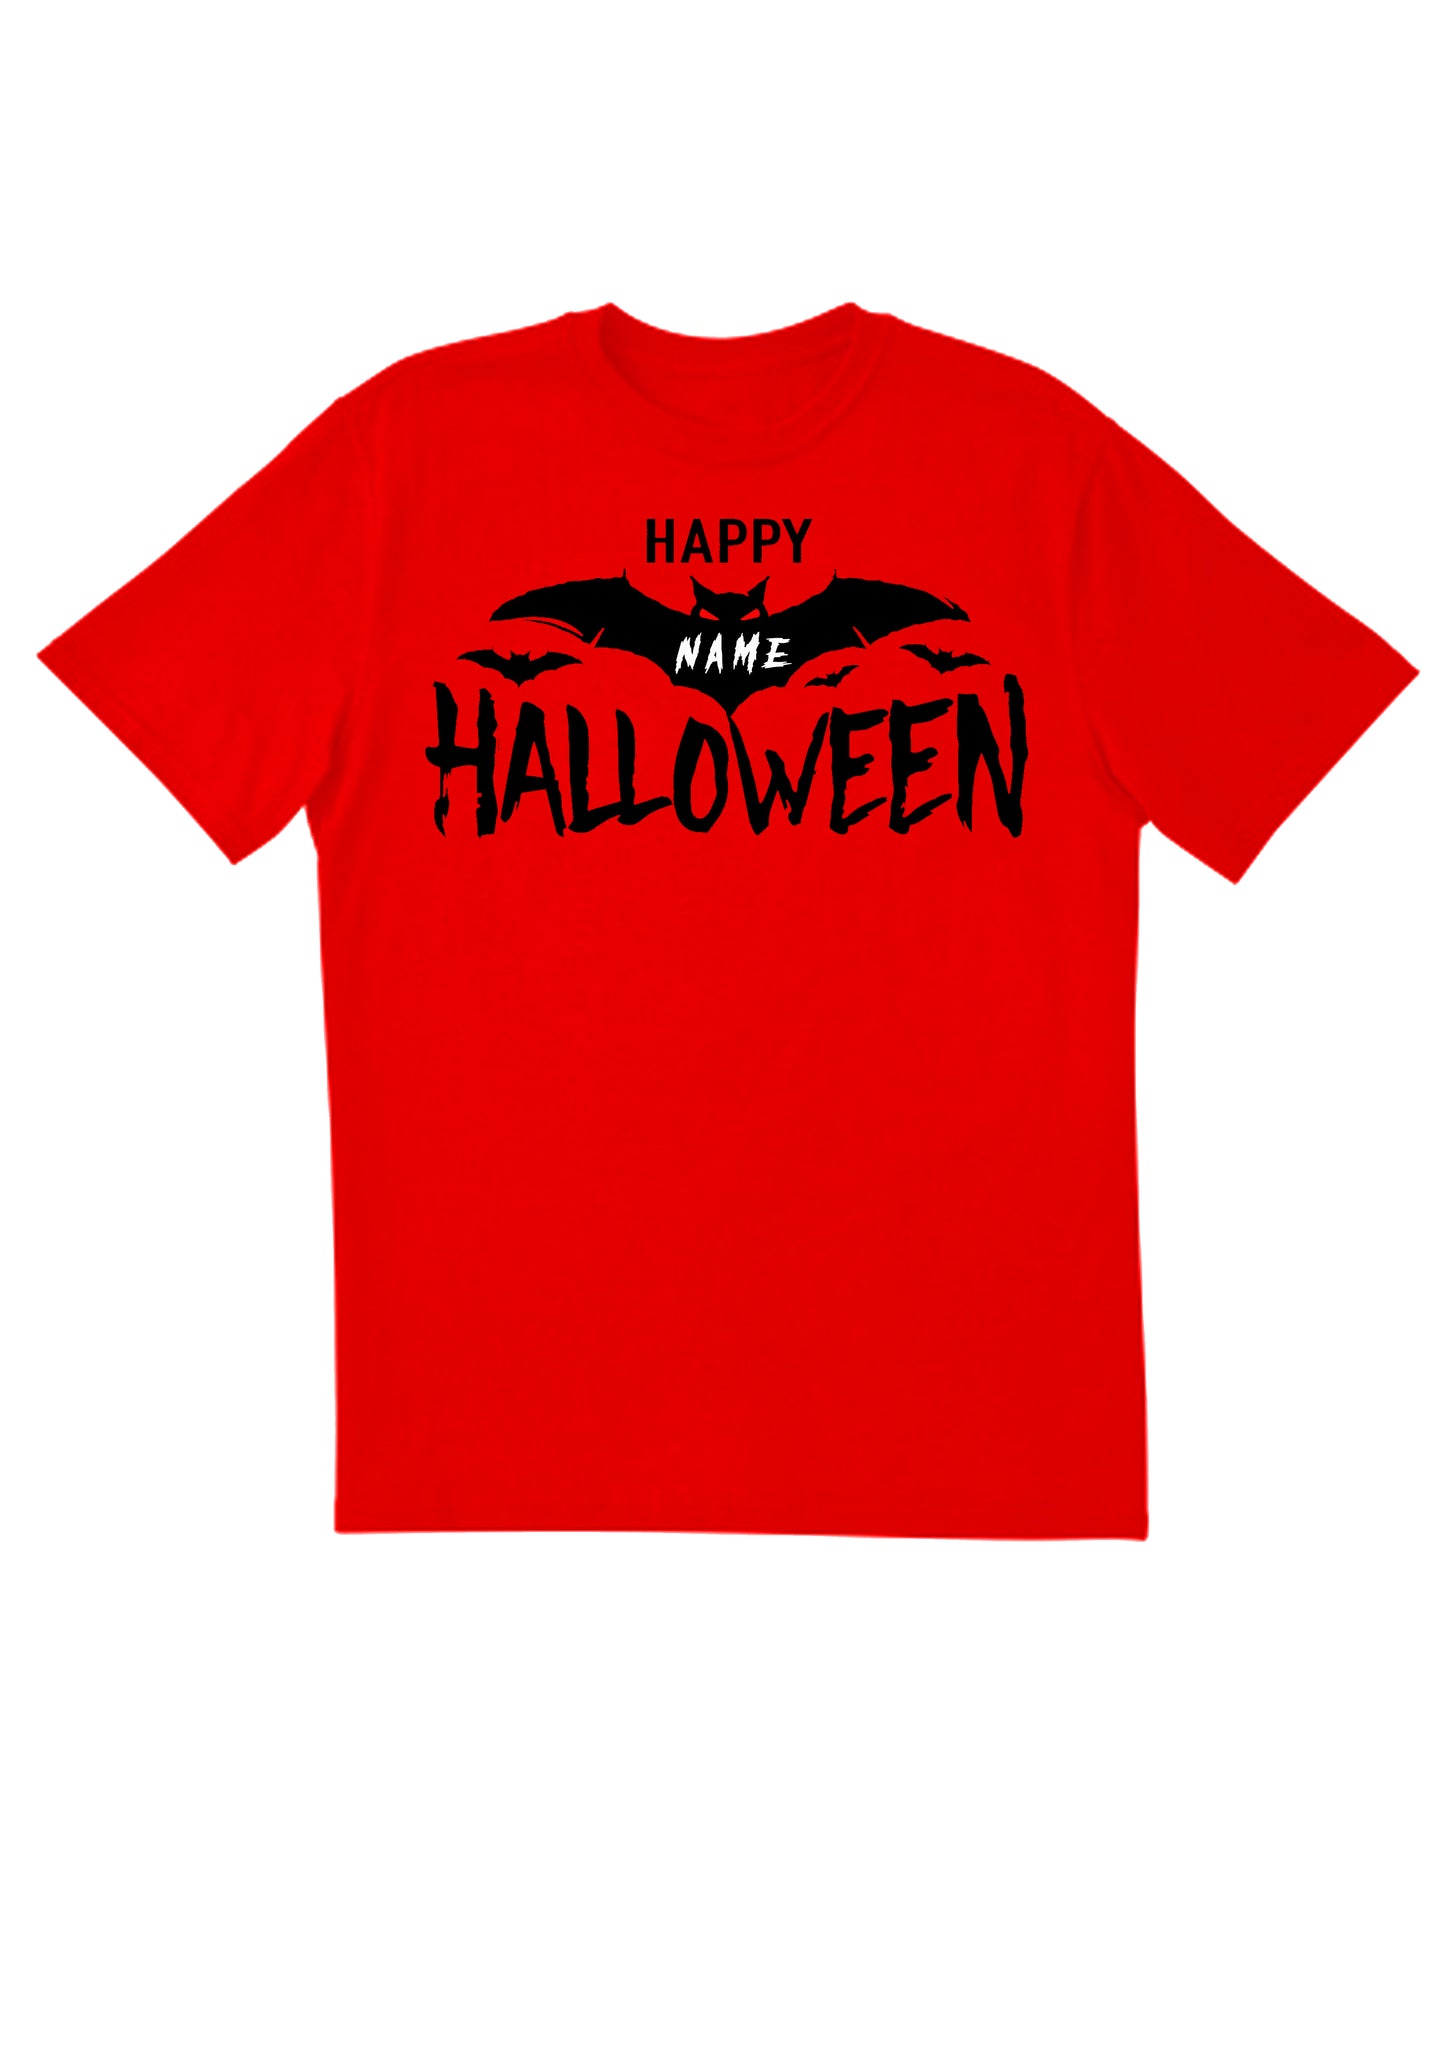 Personalised Happy Halloween with Name Children's Red T-shirt with a white and black print